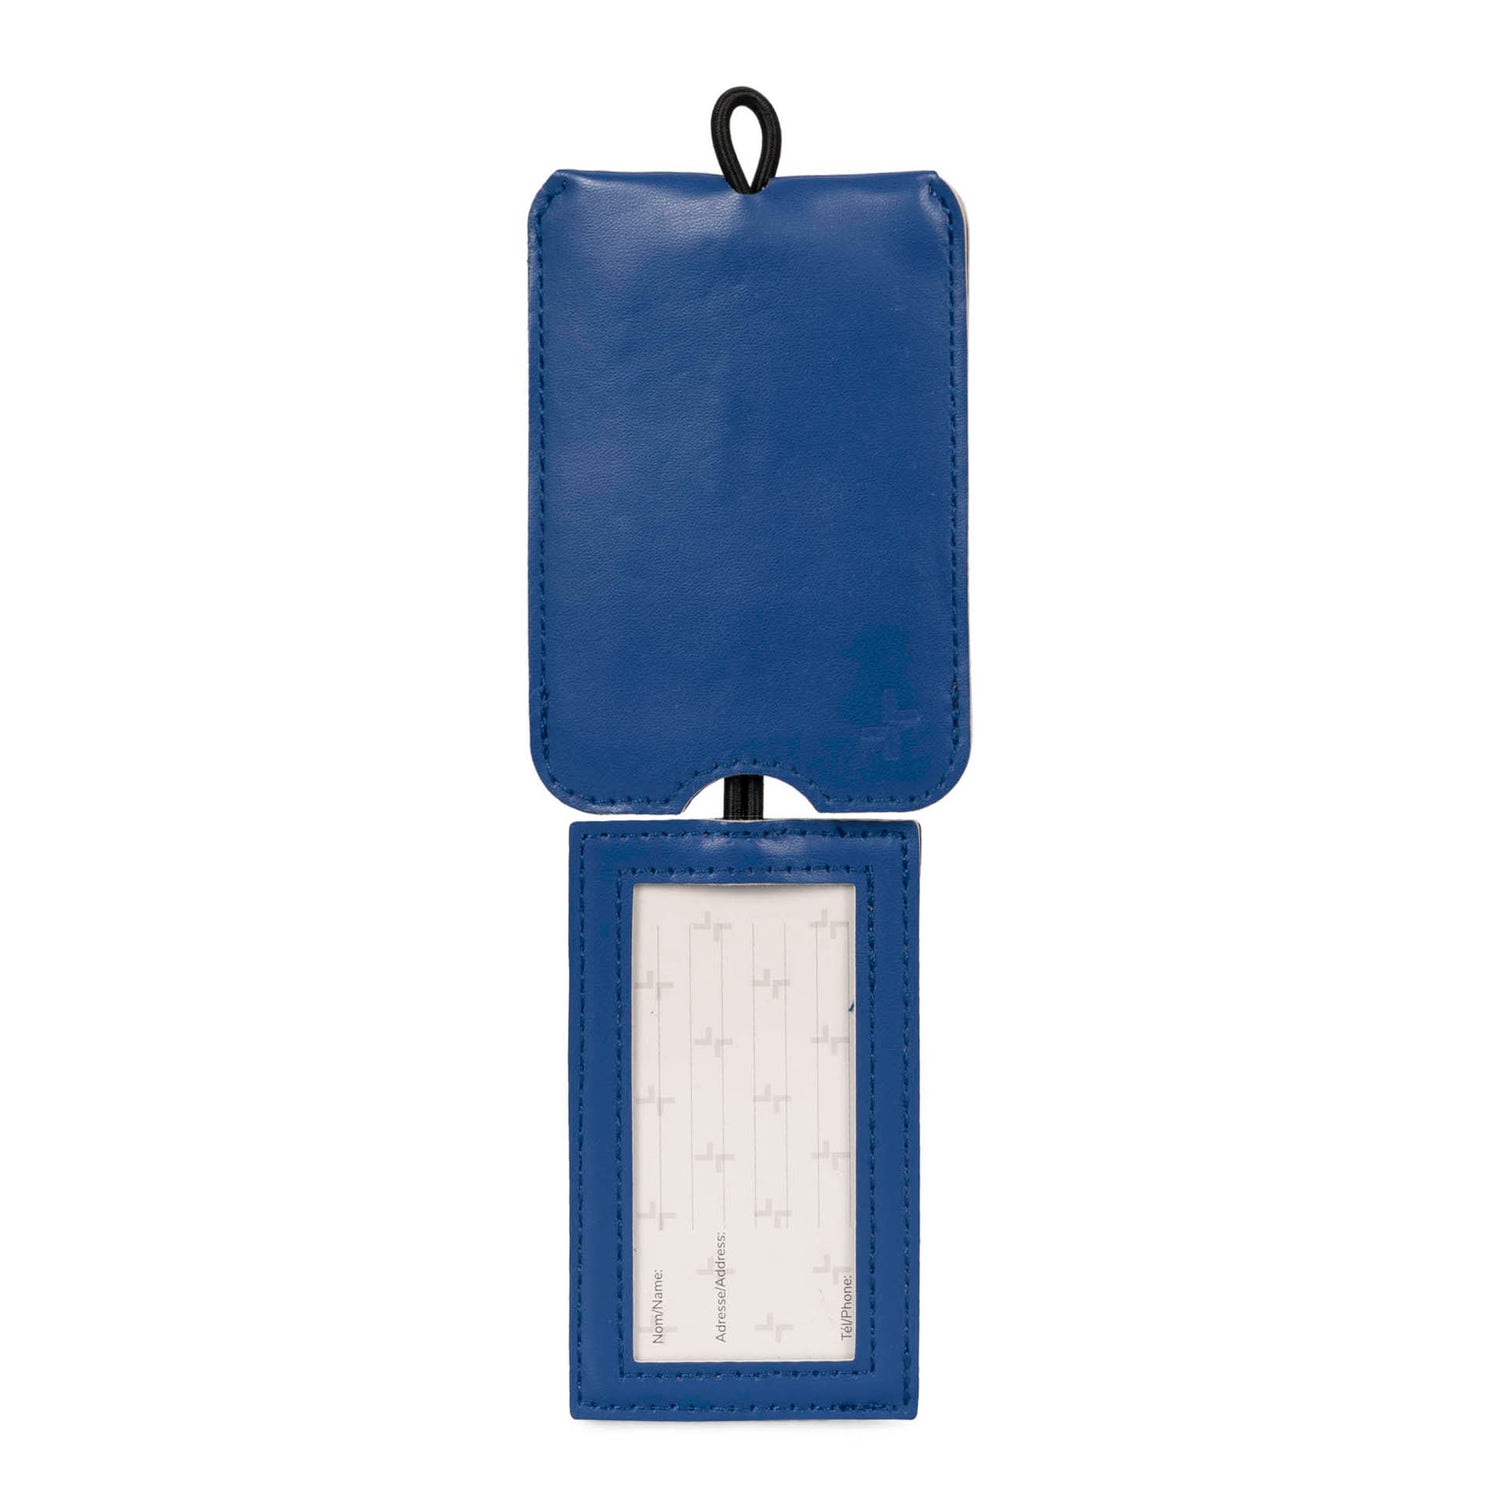 Front side of an opened blue luggage tag designed by Tracker showing blank lines for passengers' information and PU cover hanging above.